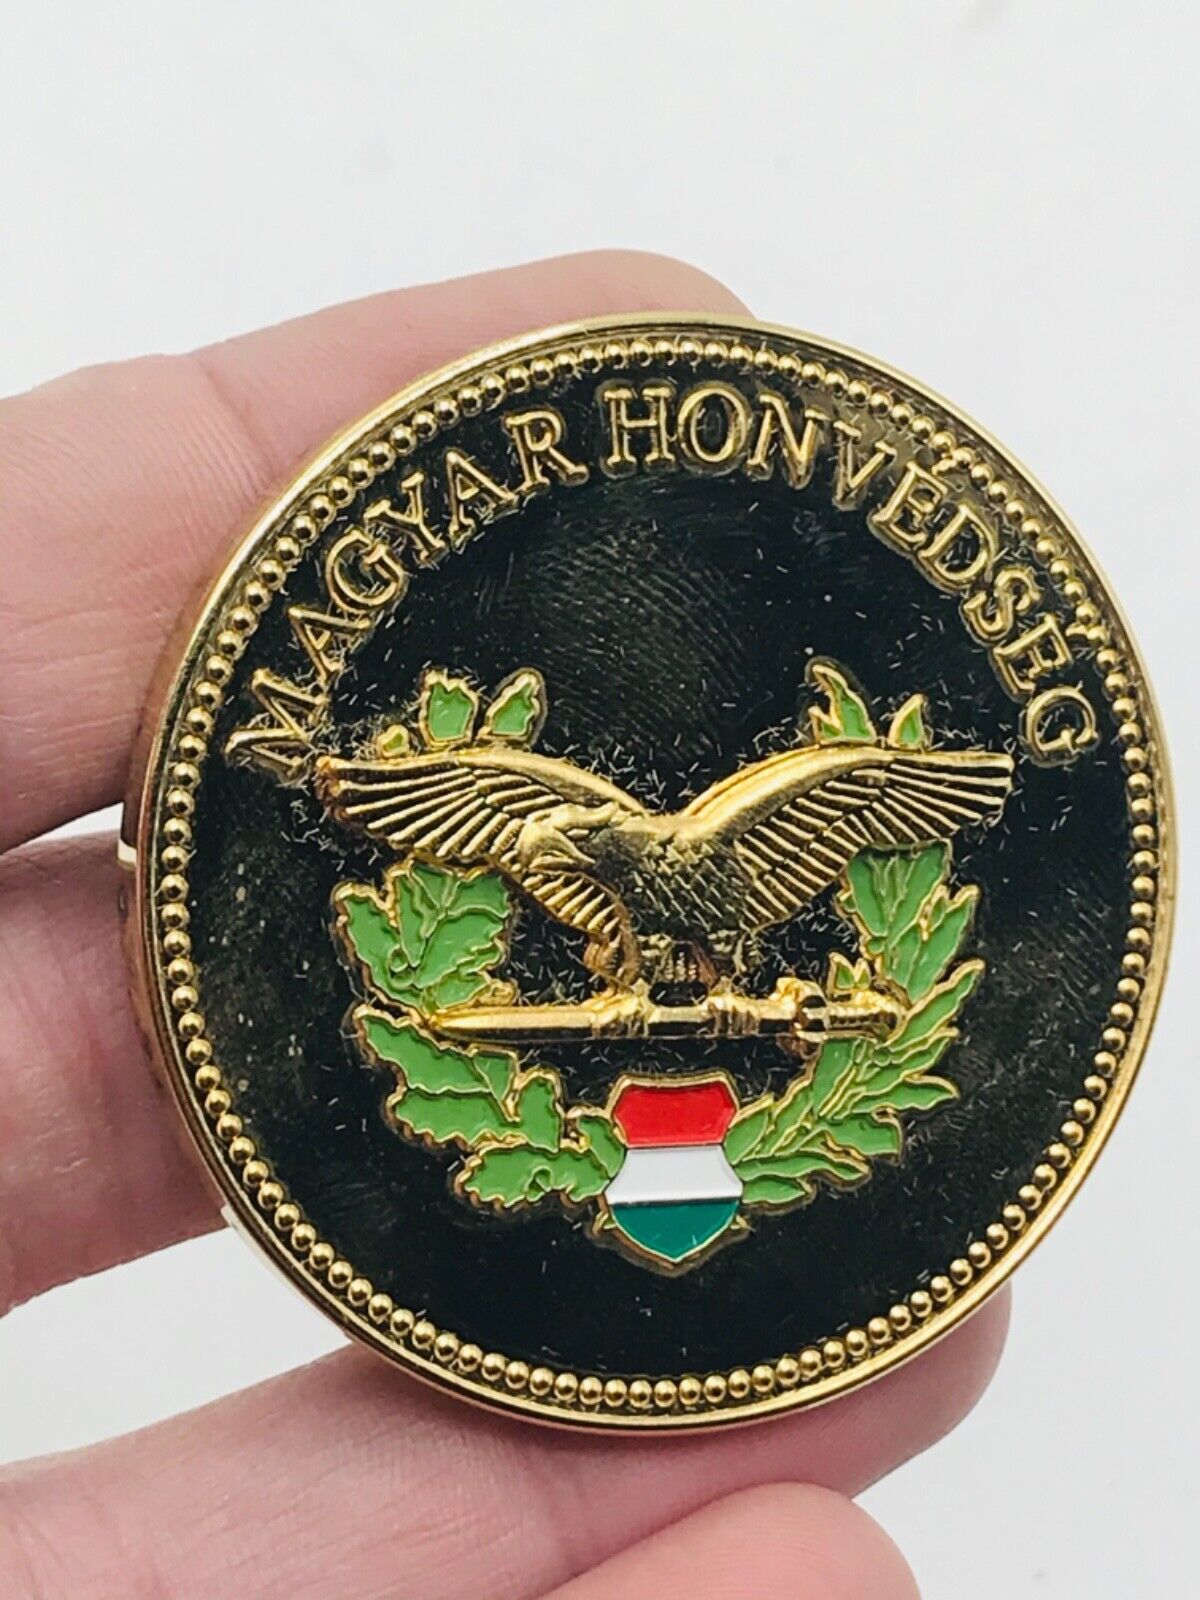 Naples Italy Thank You Magyar Honvedseg United States Army Challenge Coin 